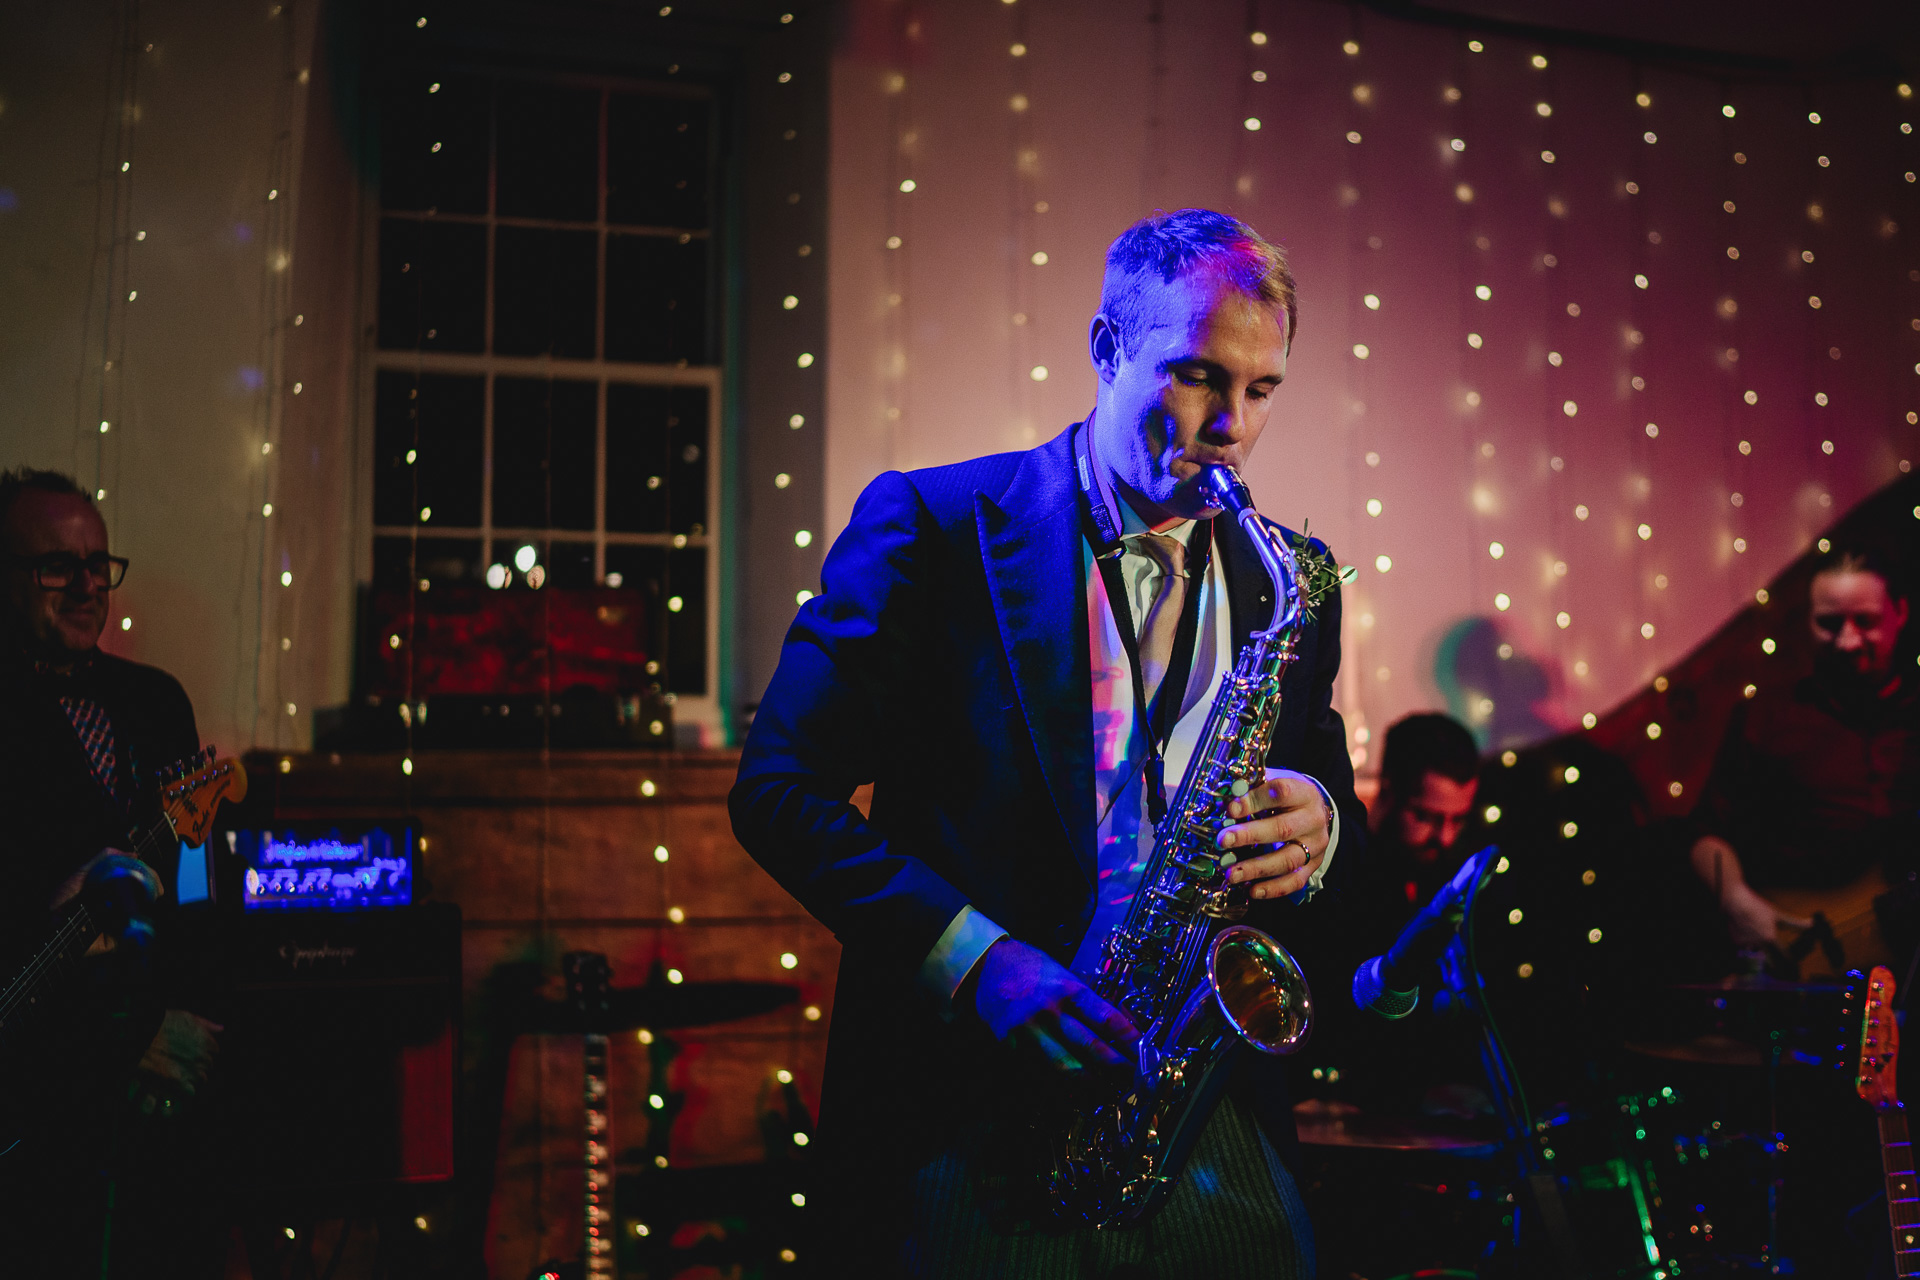 The groom, playing the saxophone